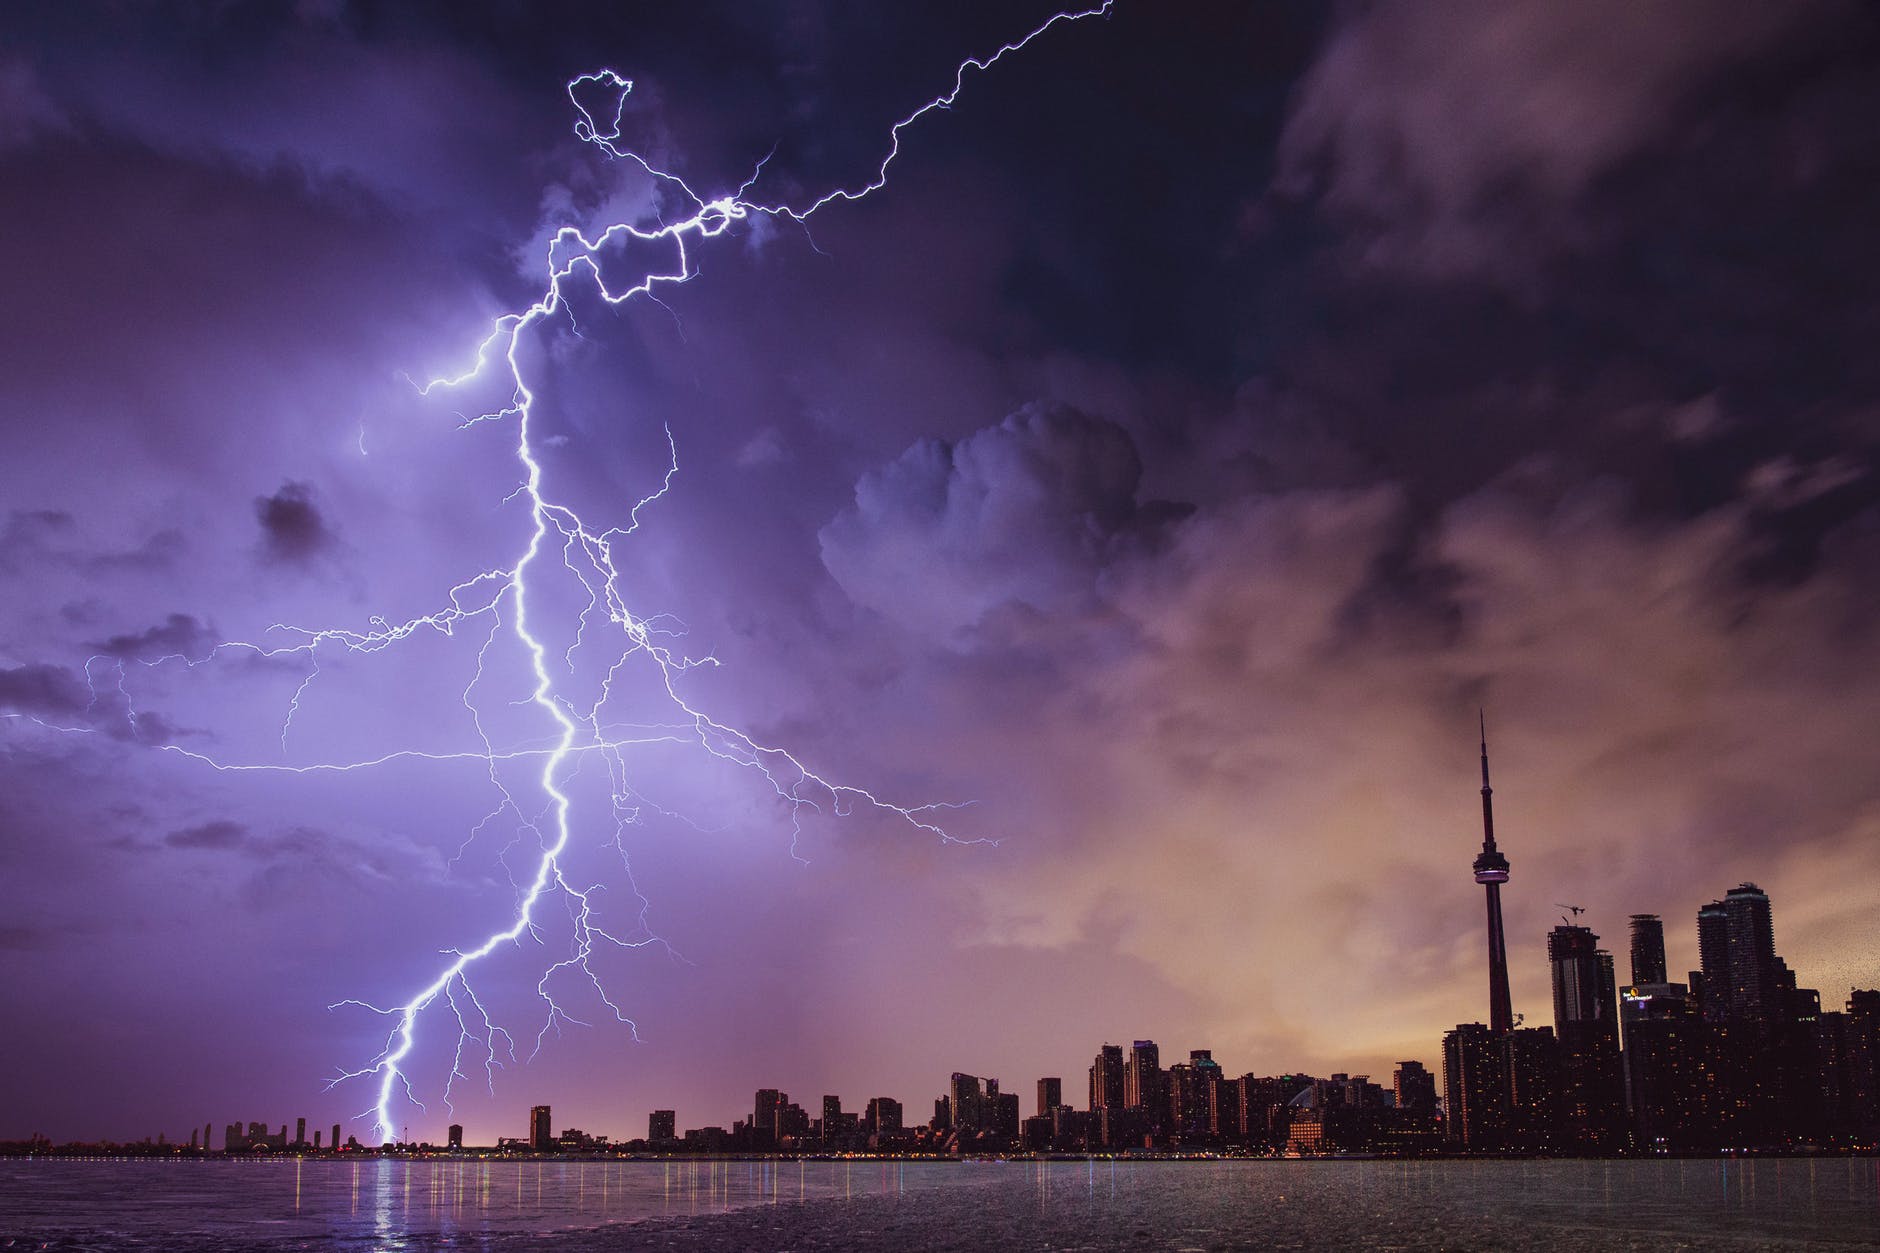 Forked lightning over a city skyline next to water